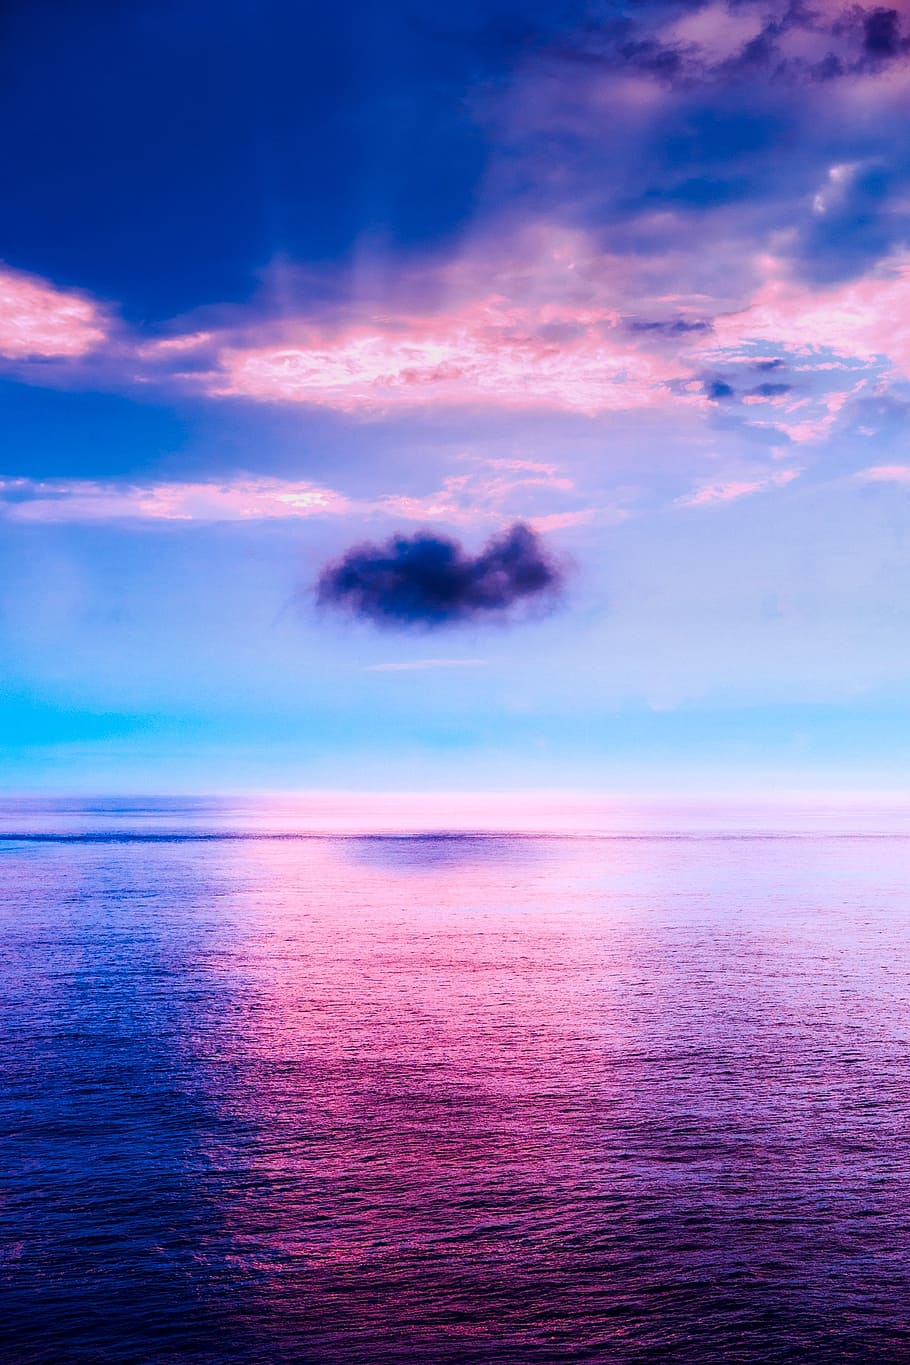 sunset, dusk, sky, clouds, beautiful, sea, ocean, view, outdoors, hdr